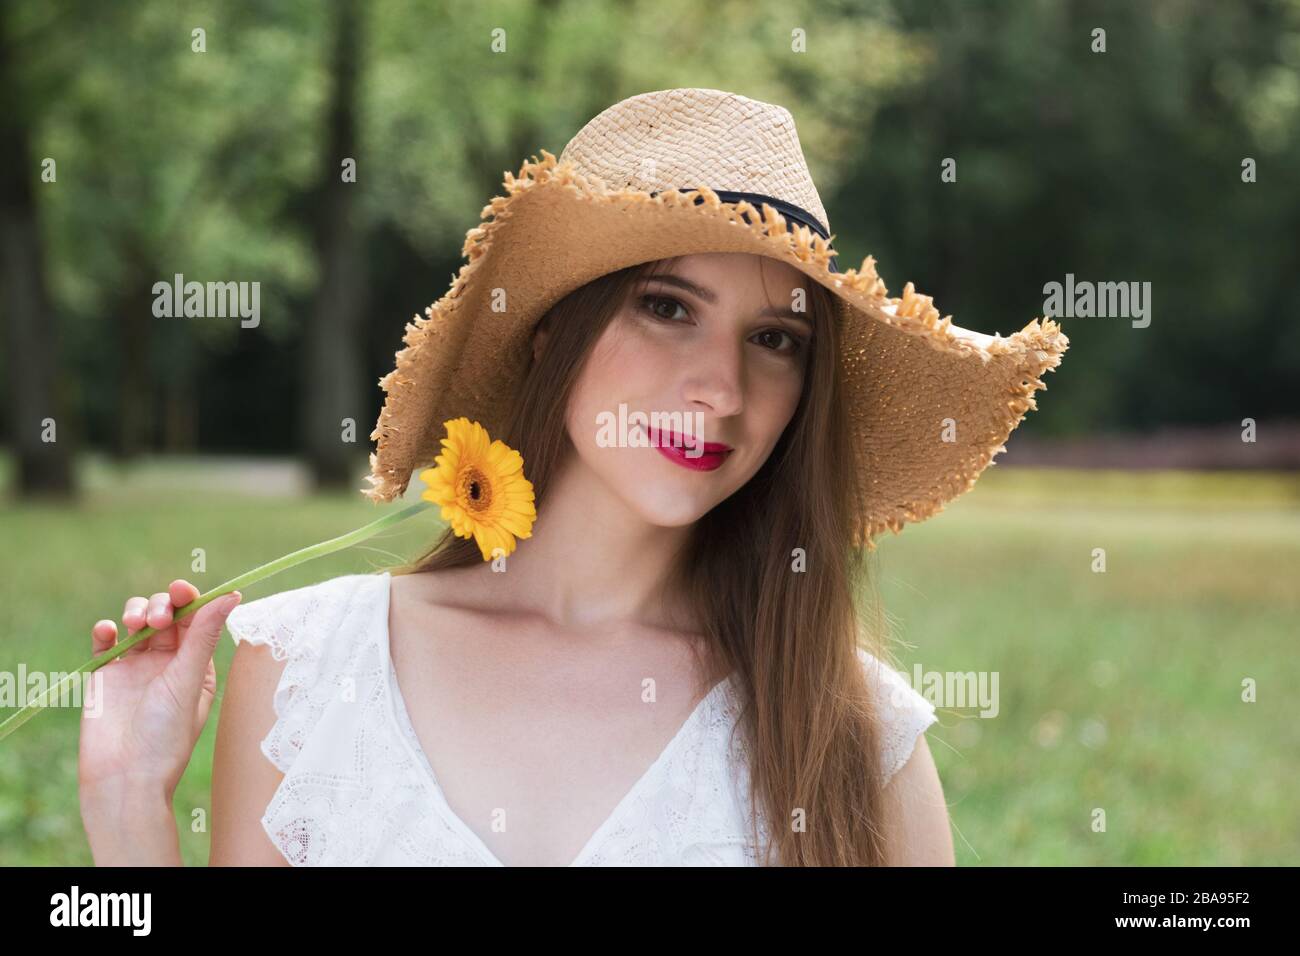 Young attractive girl holds a summer wildflower. She enjoys nature, the smell of flowers, outdoor recreation. Stock Photo